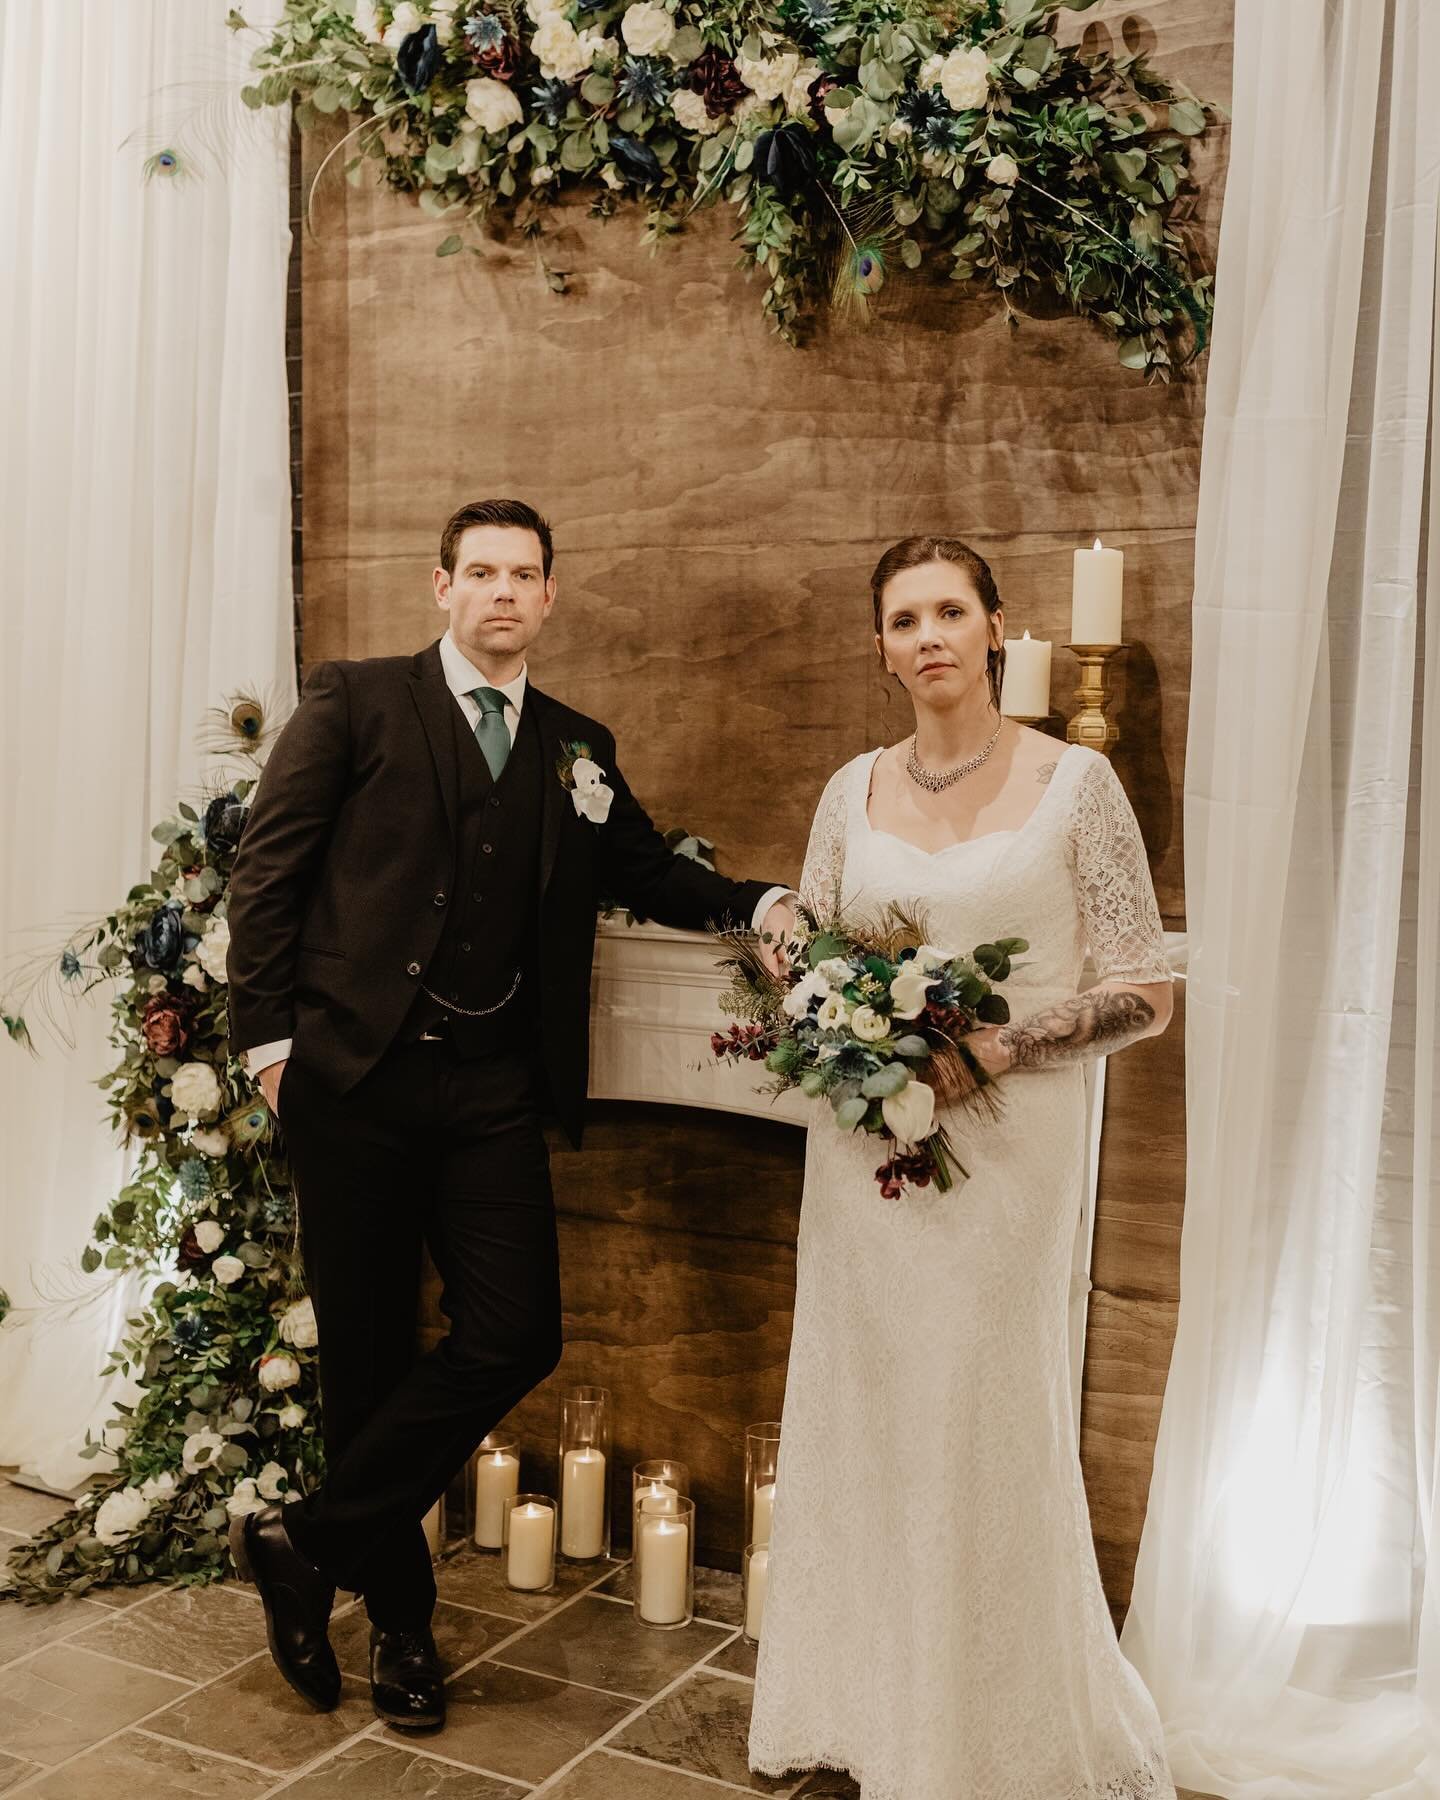 ✨Another Love Story shared at The Social. Mary Ellen &amp; Mike, it was a pleasure to be a part of it all. 
.
Photography: @laceyhillphotos 
Lux Faux Florals: @onedayaffair 
Venue: @onedaysocialaffair .
.
#intimatewedding #microwedding #weddingvenue 